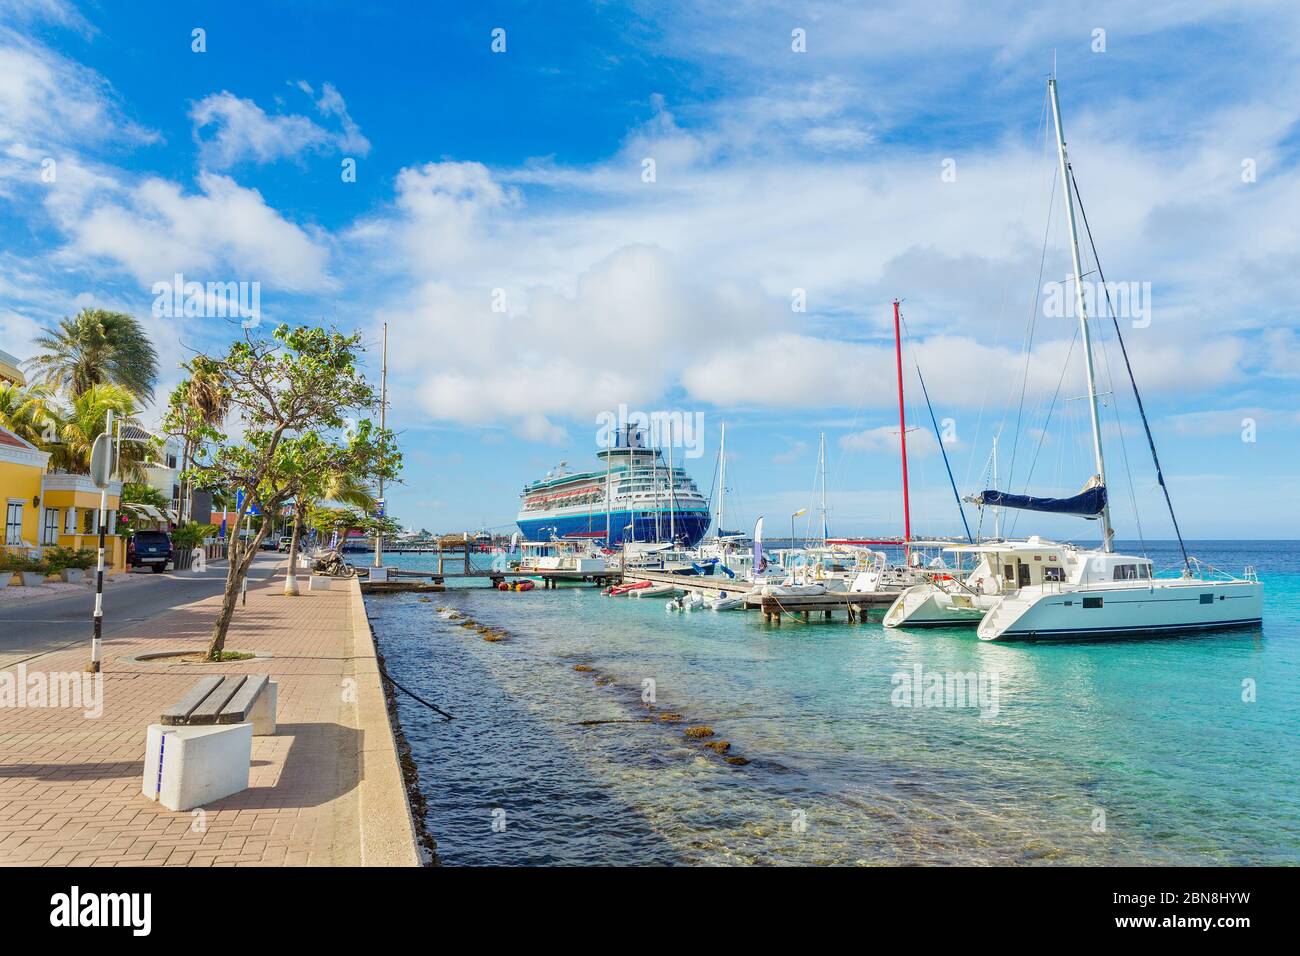 Boulevard on Bonaire with boats and cruise ship on sea Stock Photo